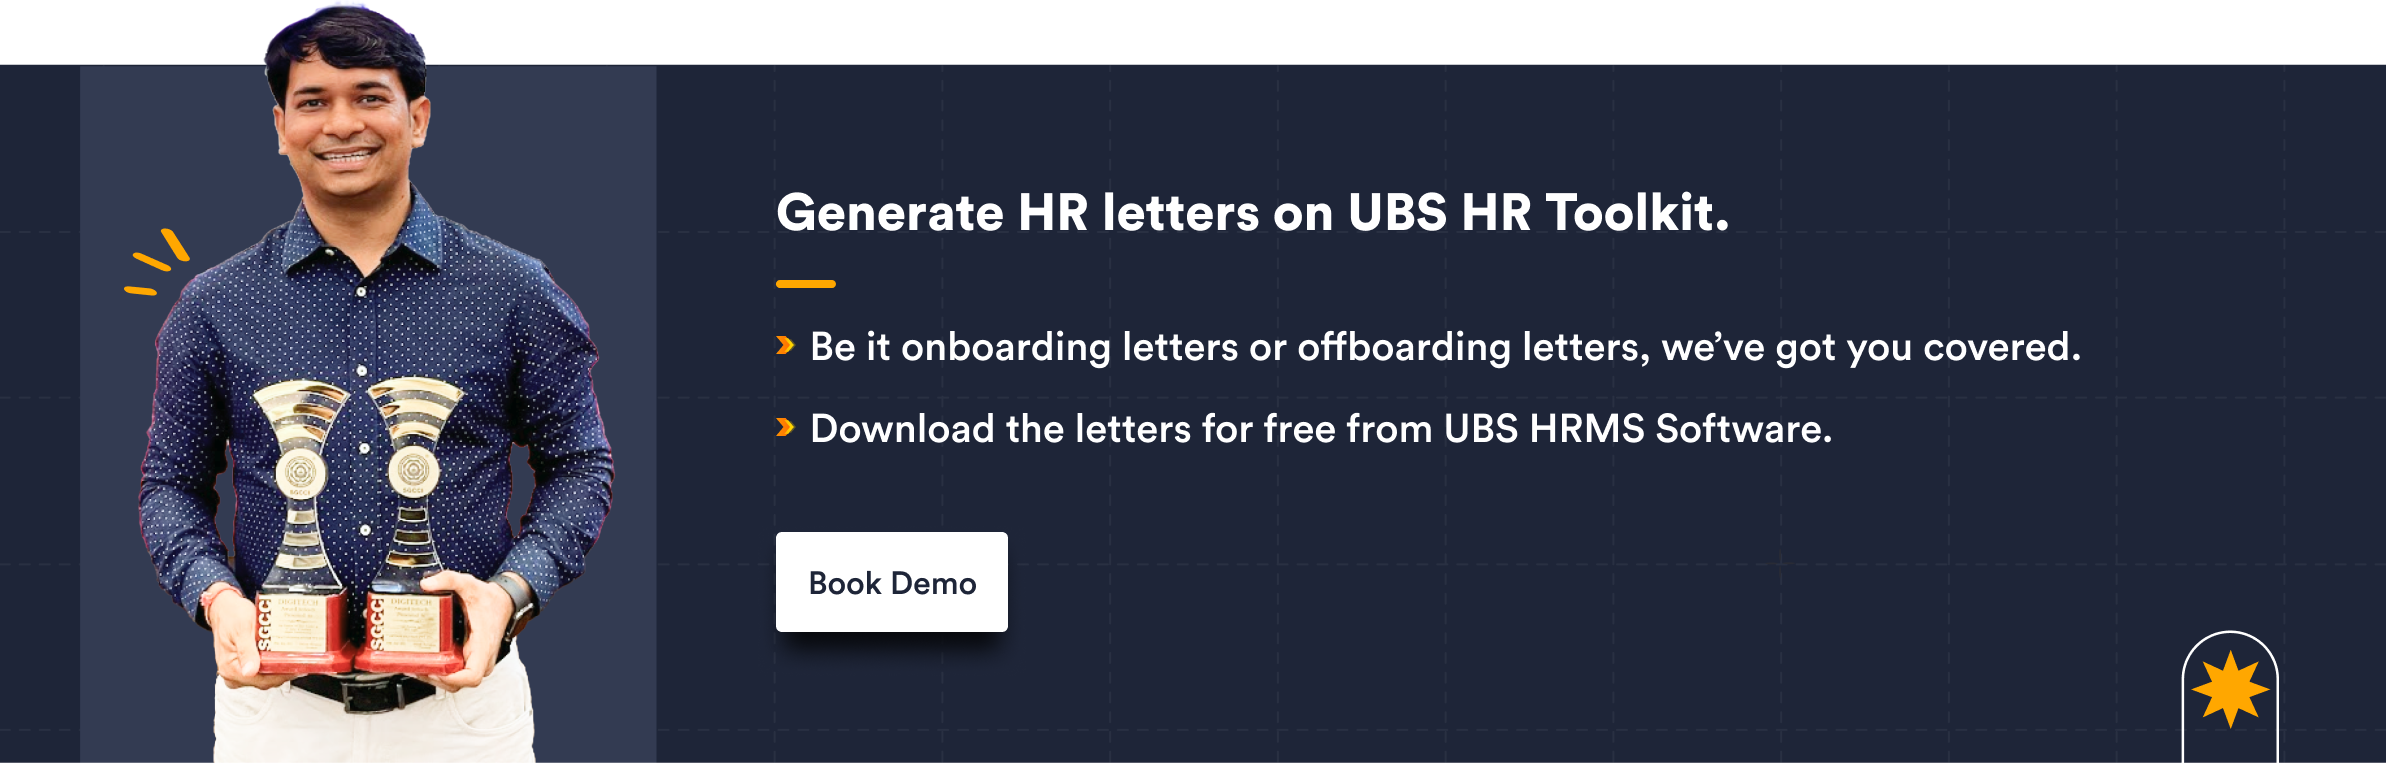 Generate HR letters on UBS HR Toolkit.